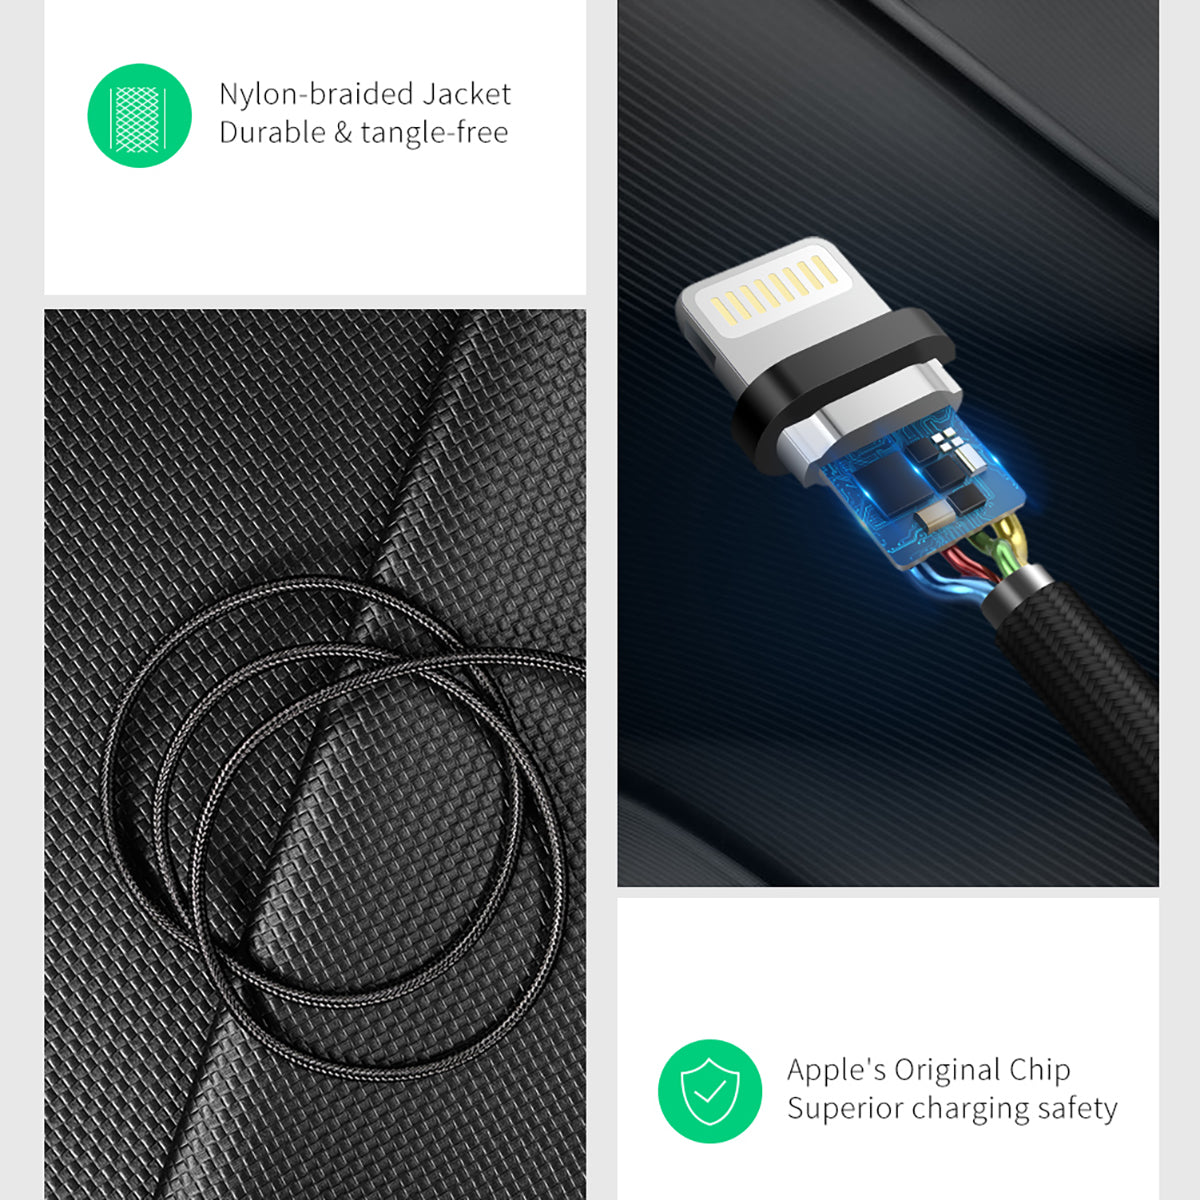 UGREEN USB Cable to Lightning (Alu Case with Braided) 1m 充電及傳輸線 Microworks Online Store